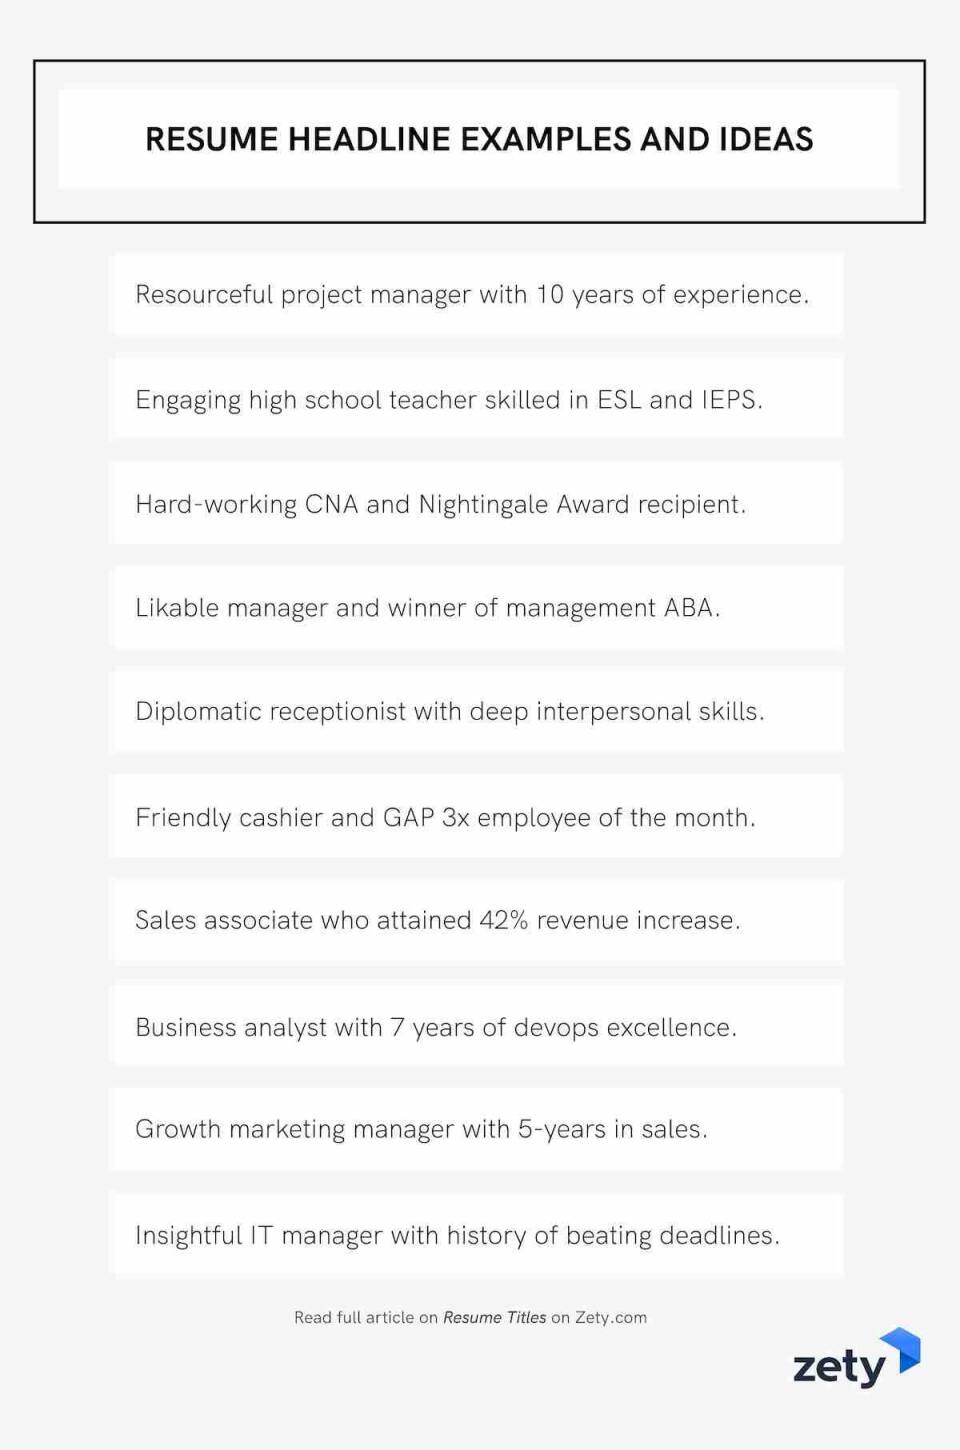 Resume Title Examples